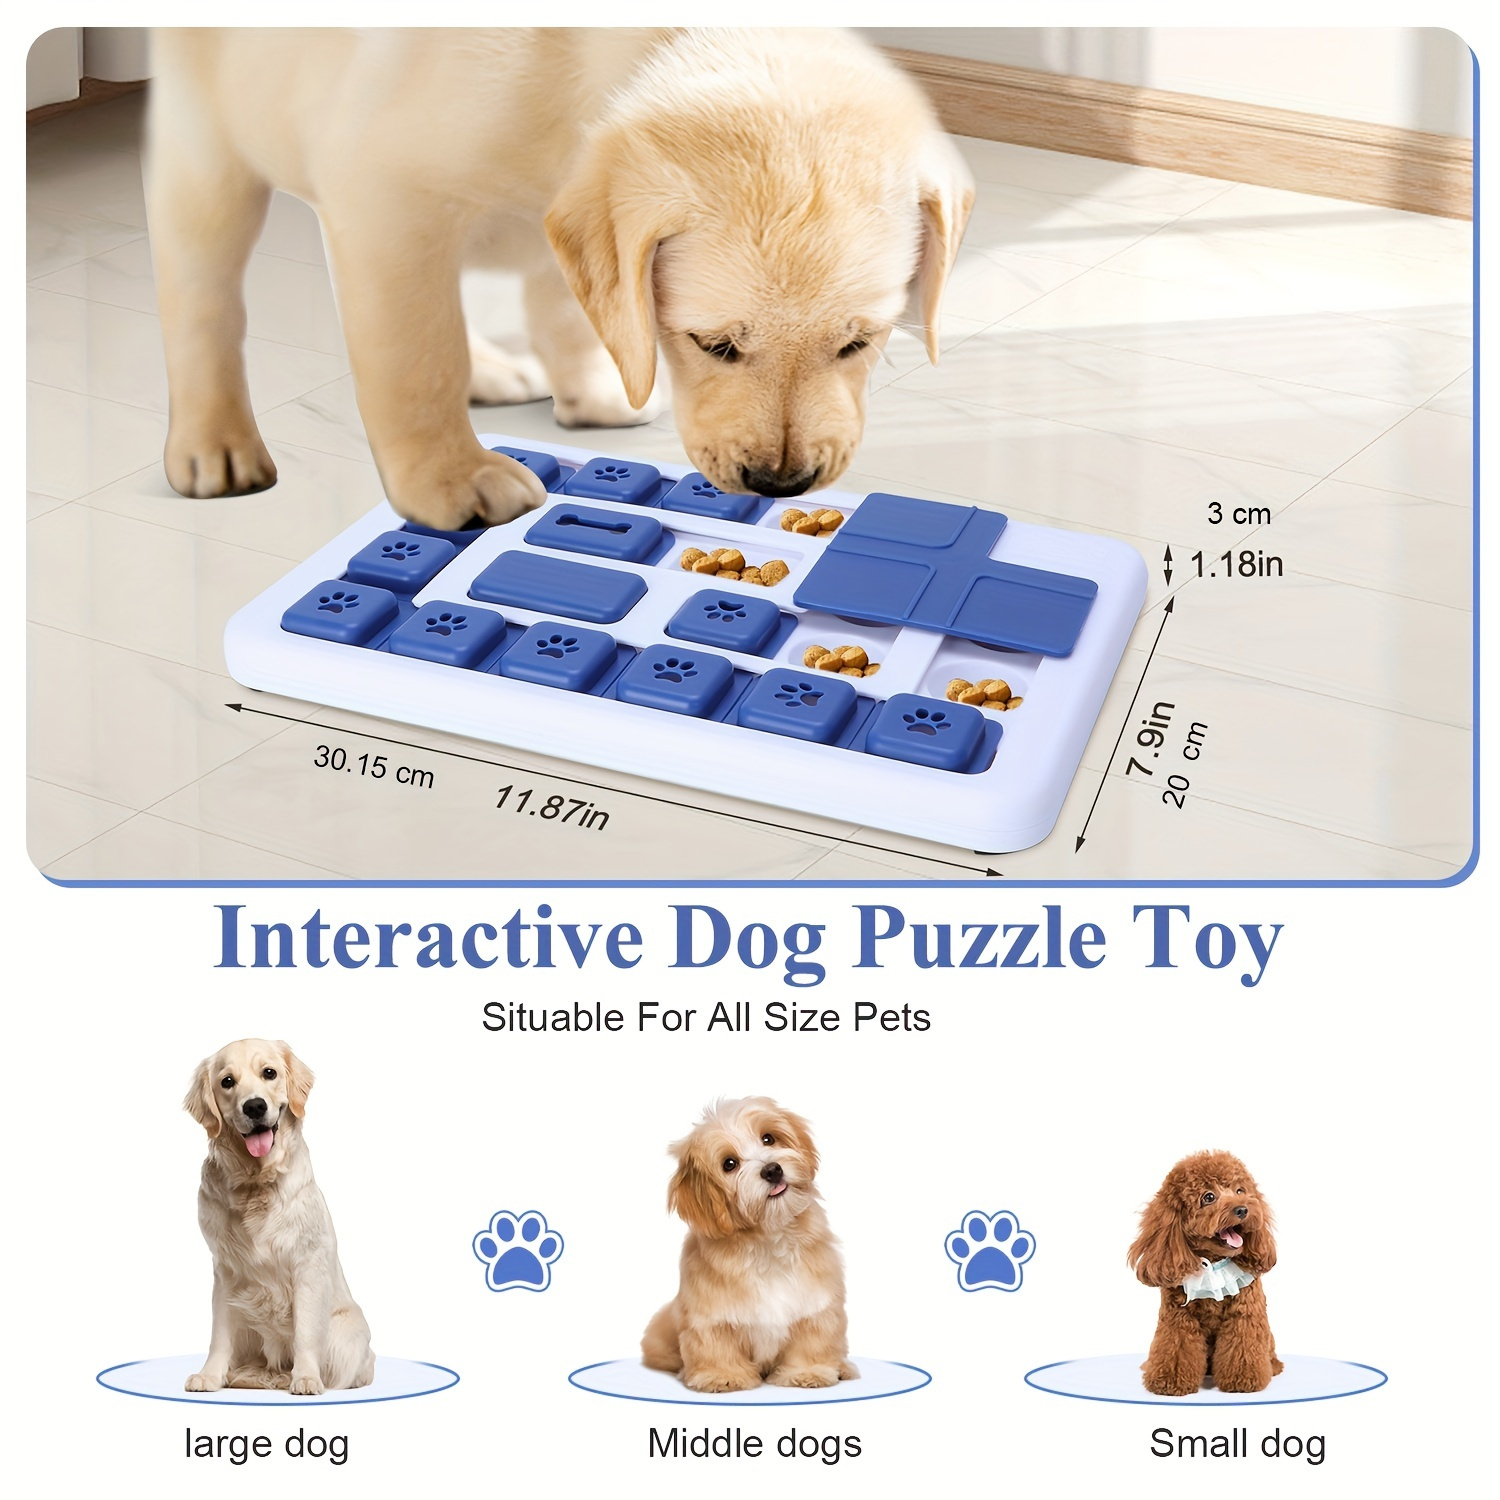 https://img.kwcdn.com/product/interactive-puzzle-toy/d69d2f15w98k18-9b600b28/1e133b31707/a7dce873-6c1b-423d-a799-e610f39eaeea_1500x1500.jpeg.a.jpg